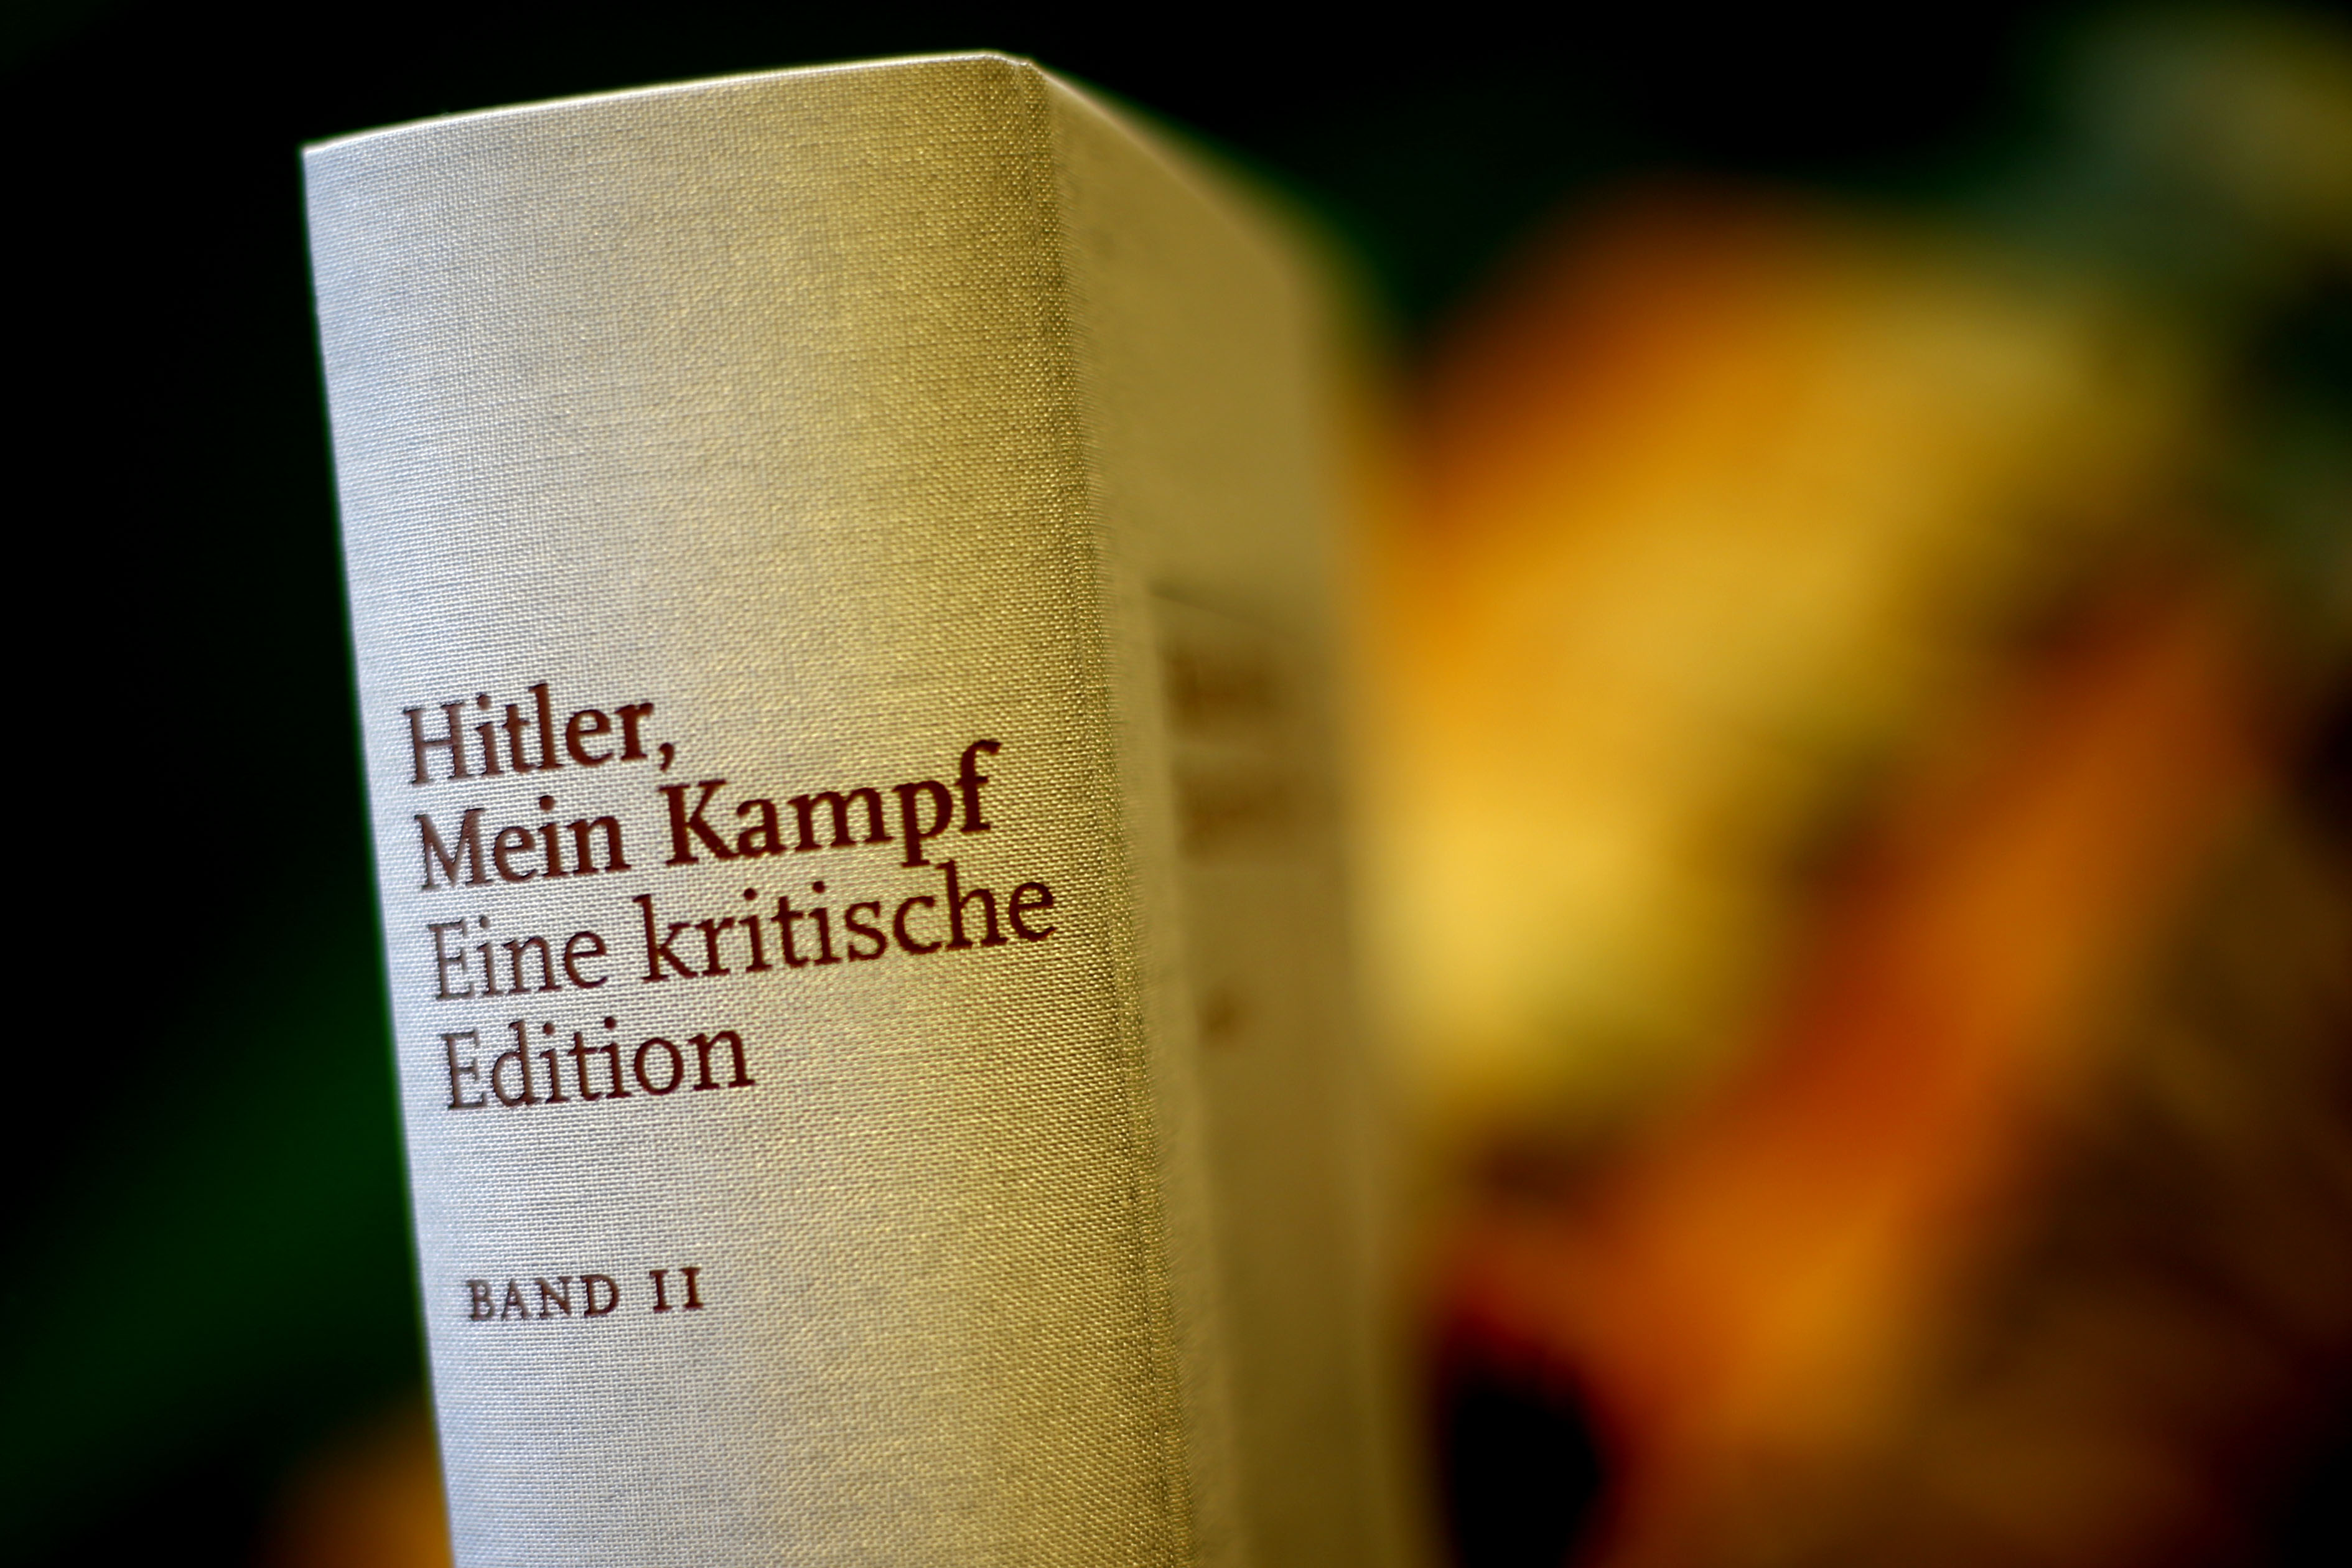 Why do Texas prisons ban certain books, such as 'Freakonomics,' but not  Hitler's 'Mein Kampf'?